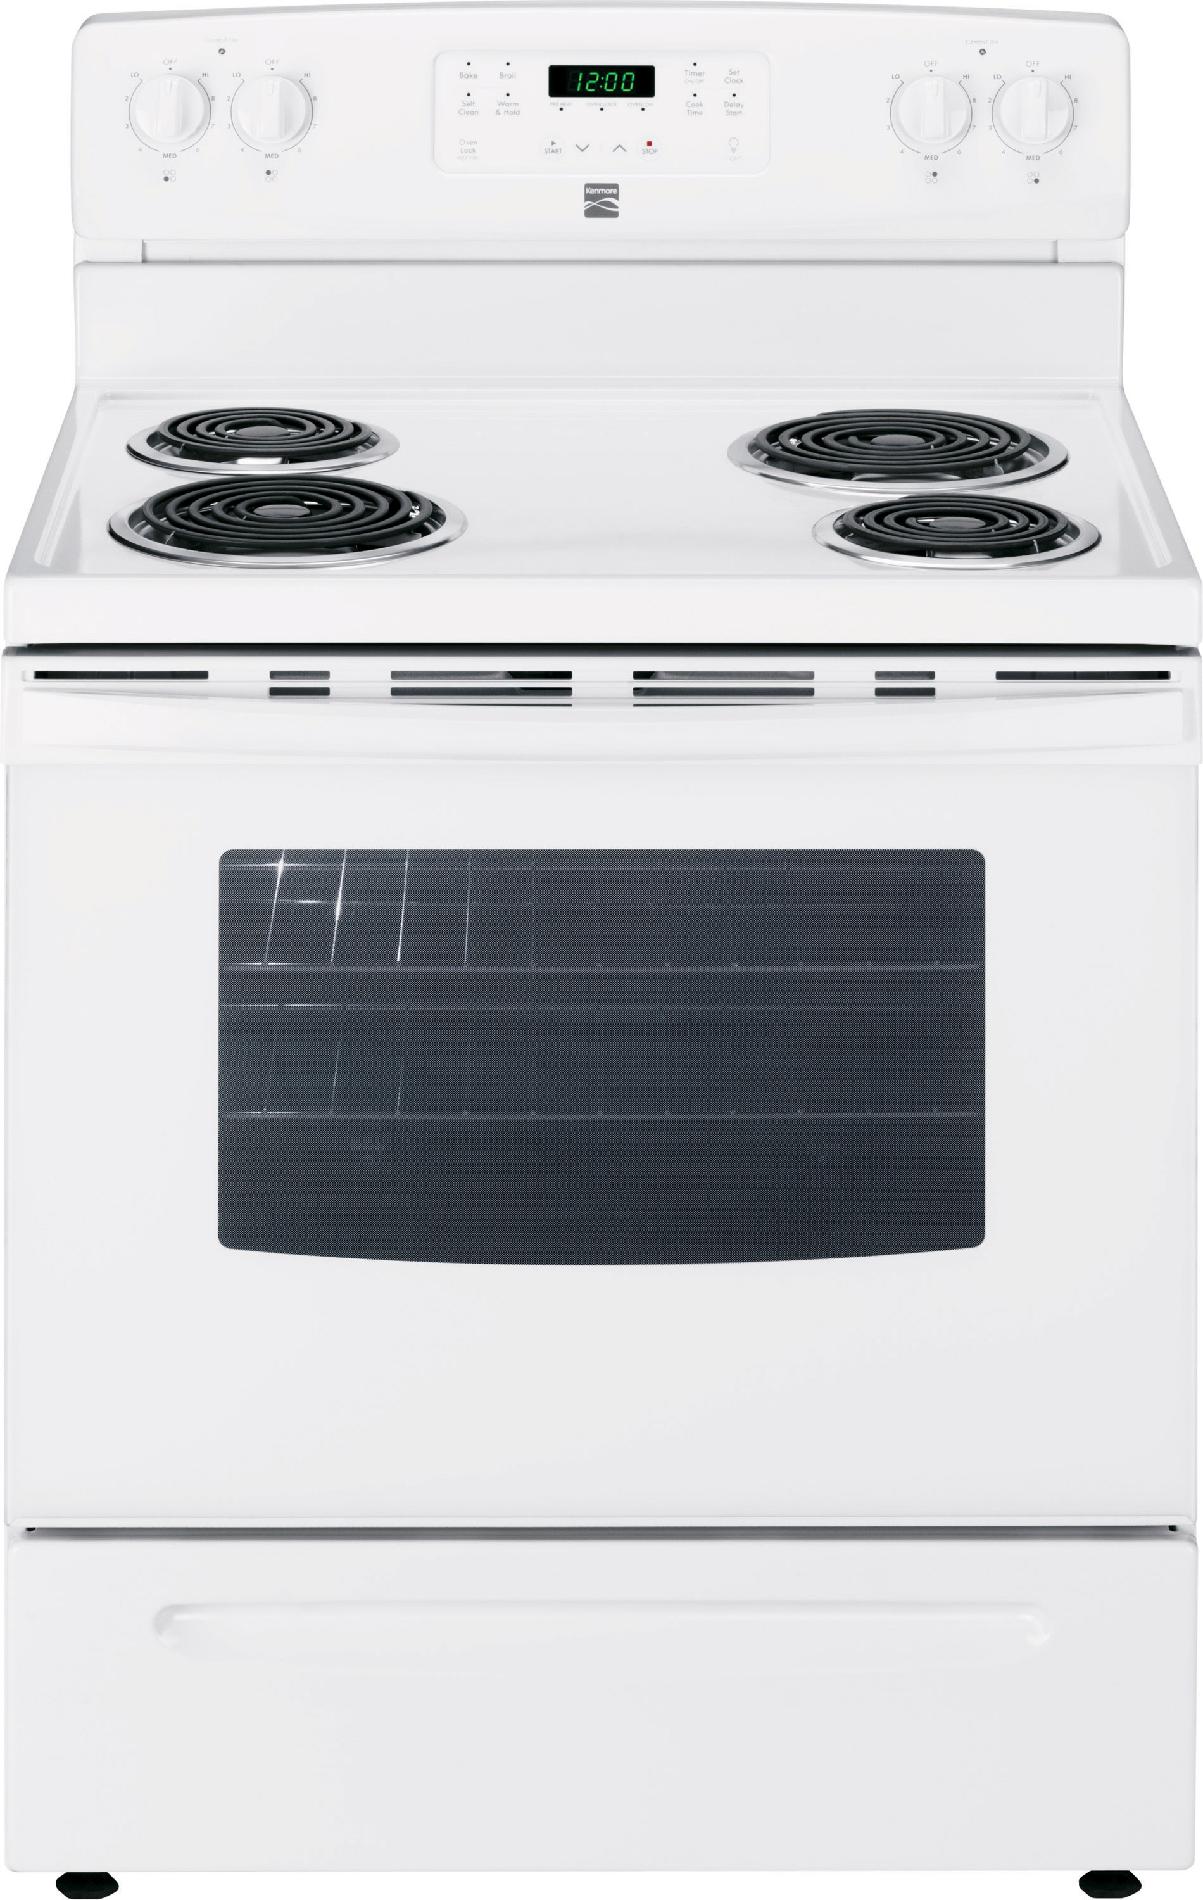 Kenmore 5.3 cu. ft. Electric Range w/ Self-Cleaning Oven - White